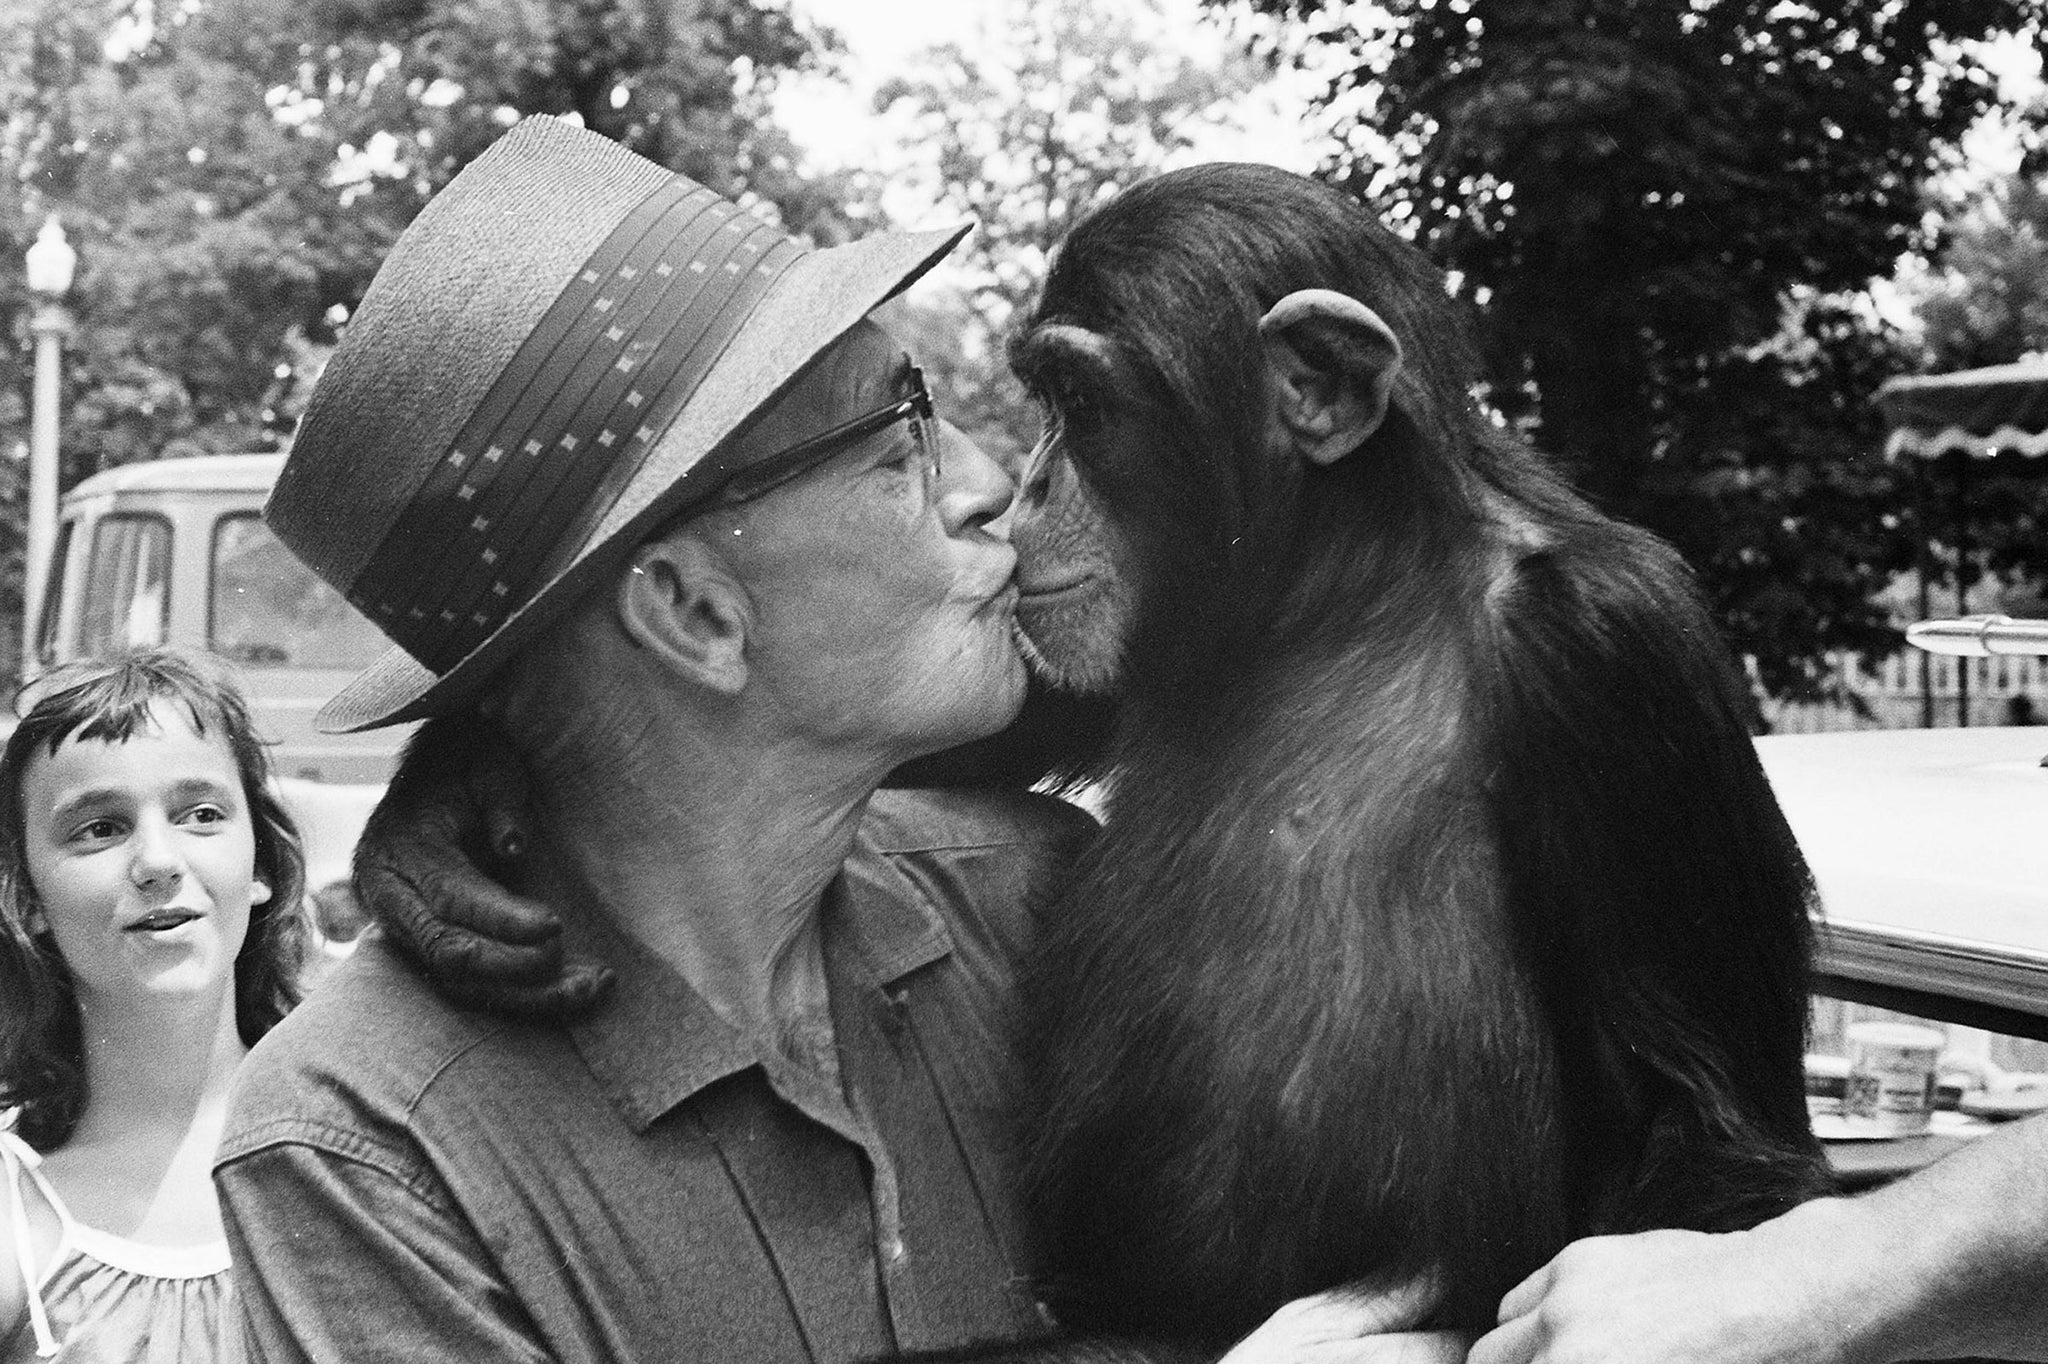 A man and chimpanzee at Weed Park Zoo, 1965. -- Muscatine Journal